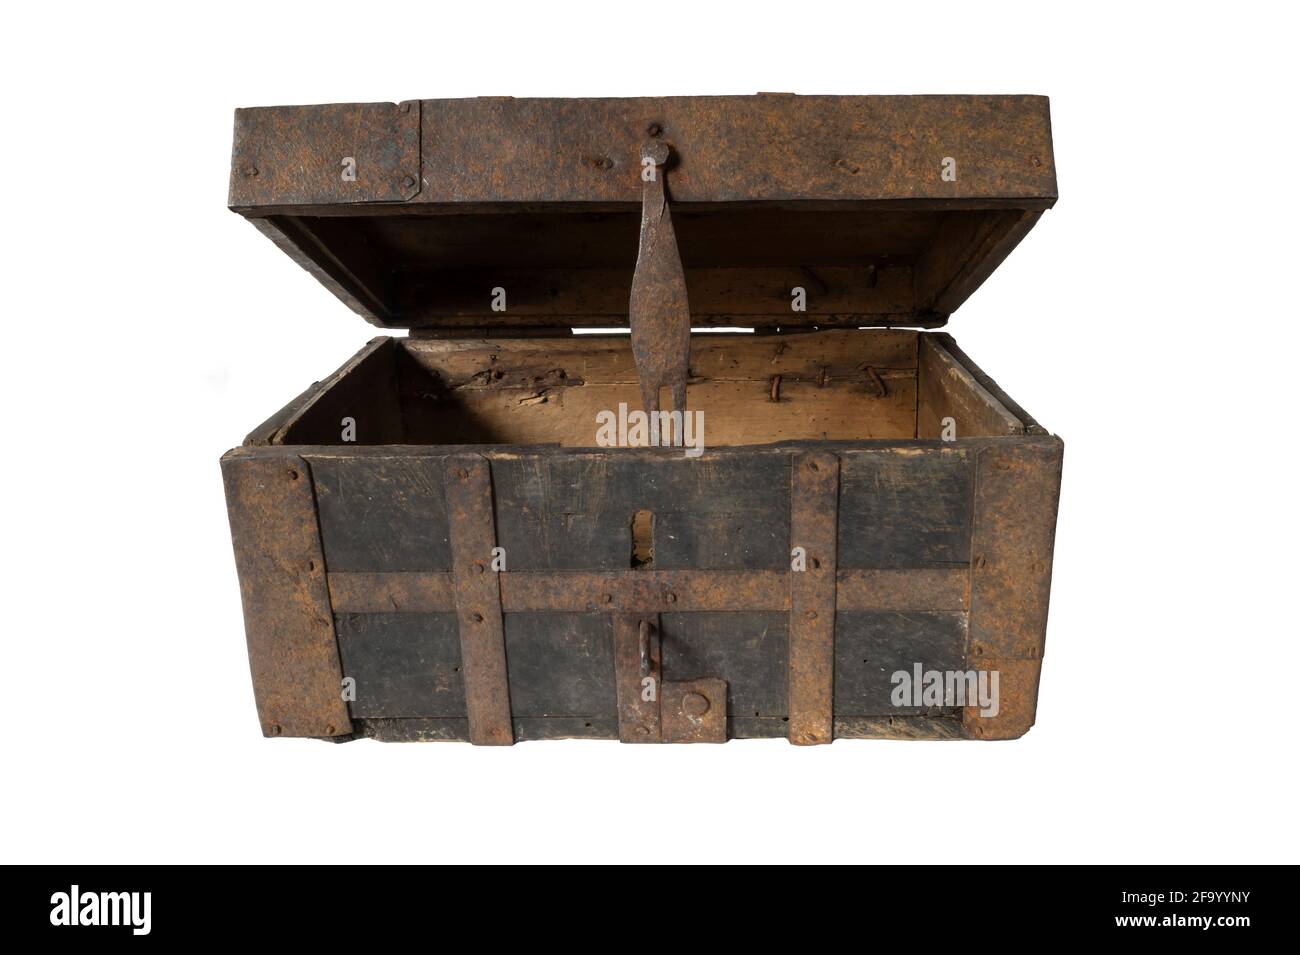 An open old chest on a white background. Wooden box upholstered in iron Stock Photo